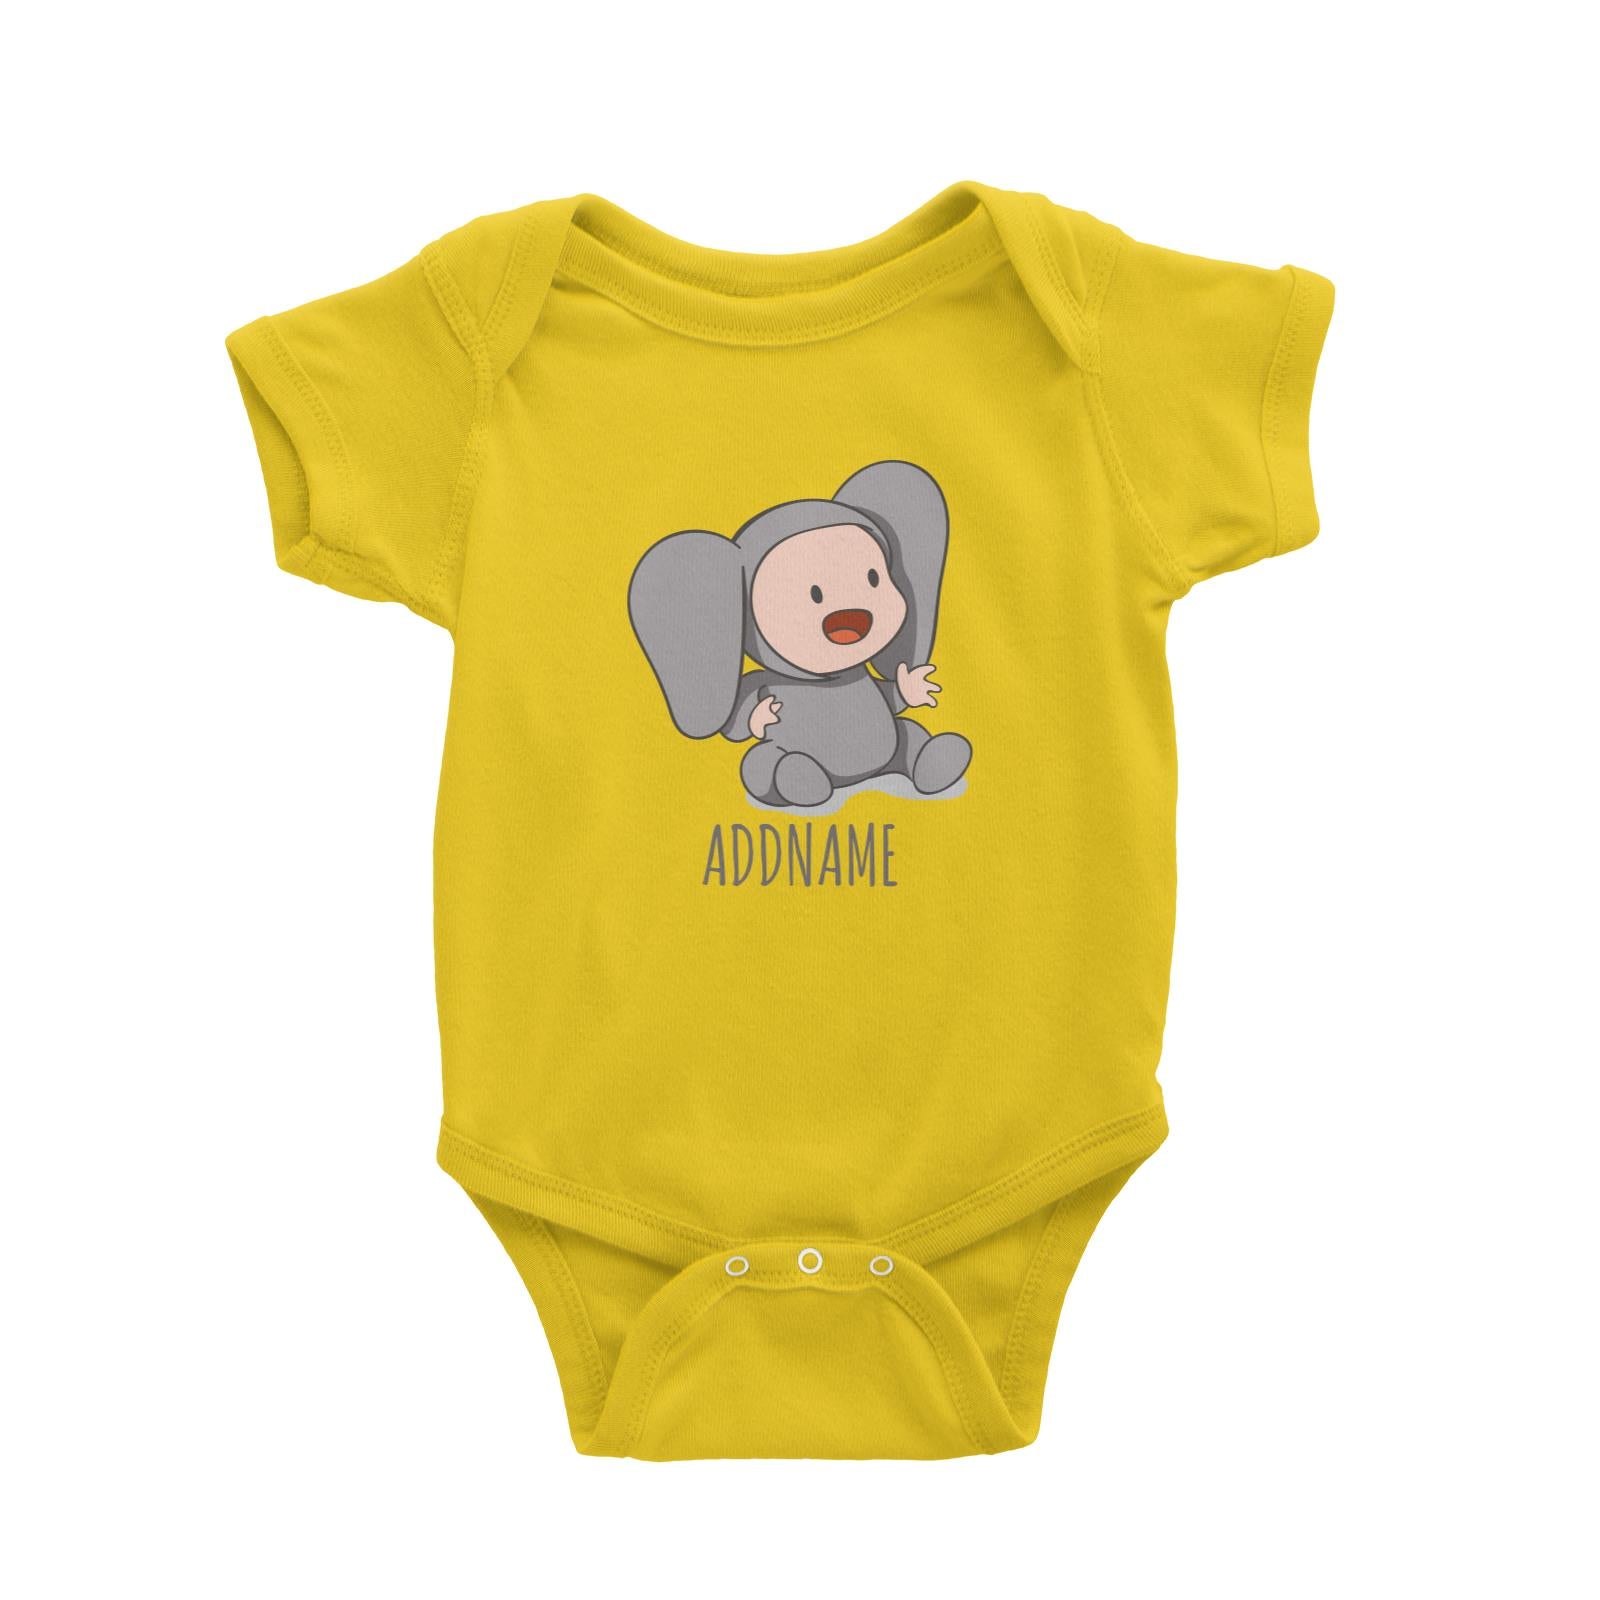 Cute Baby in Grey Elephant Suit Addname Baby Romper